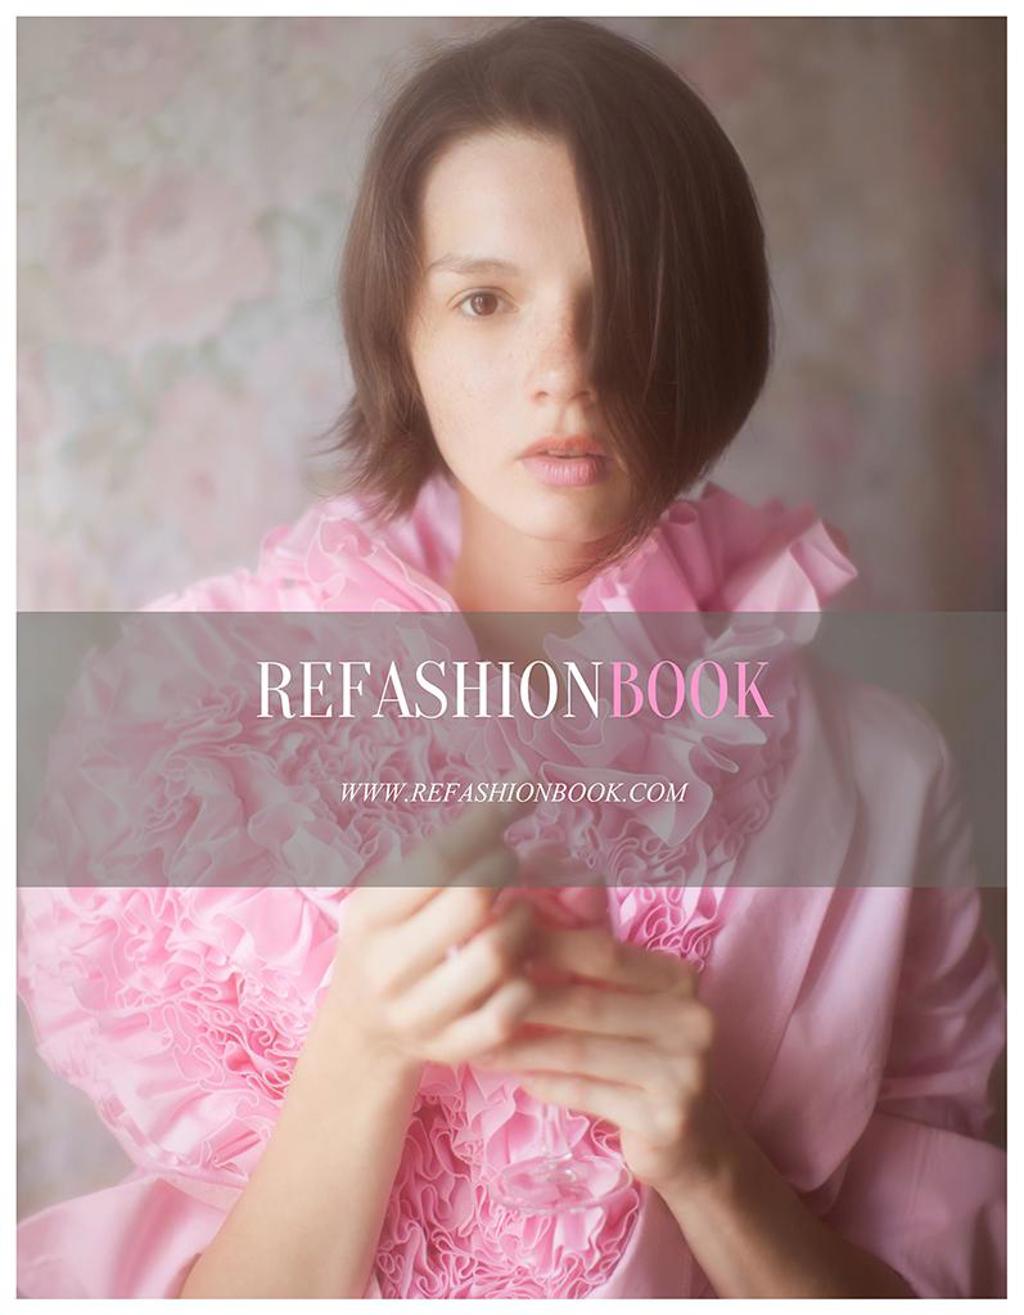 Editorials - Selected works.REFASHION BOOK VOL.1 - REFASHION HUNGER - For Action Against Hunger - Mon Cheri Doux